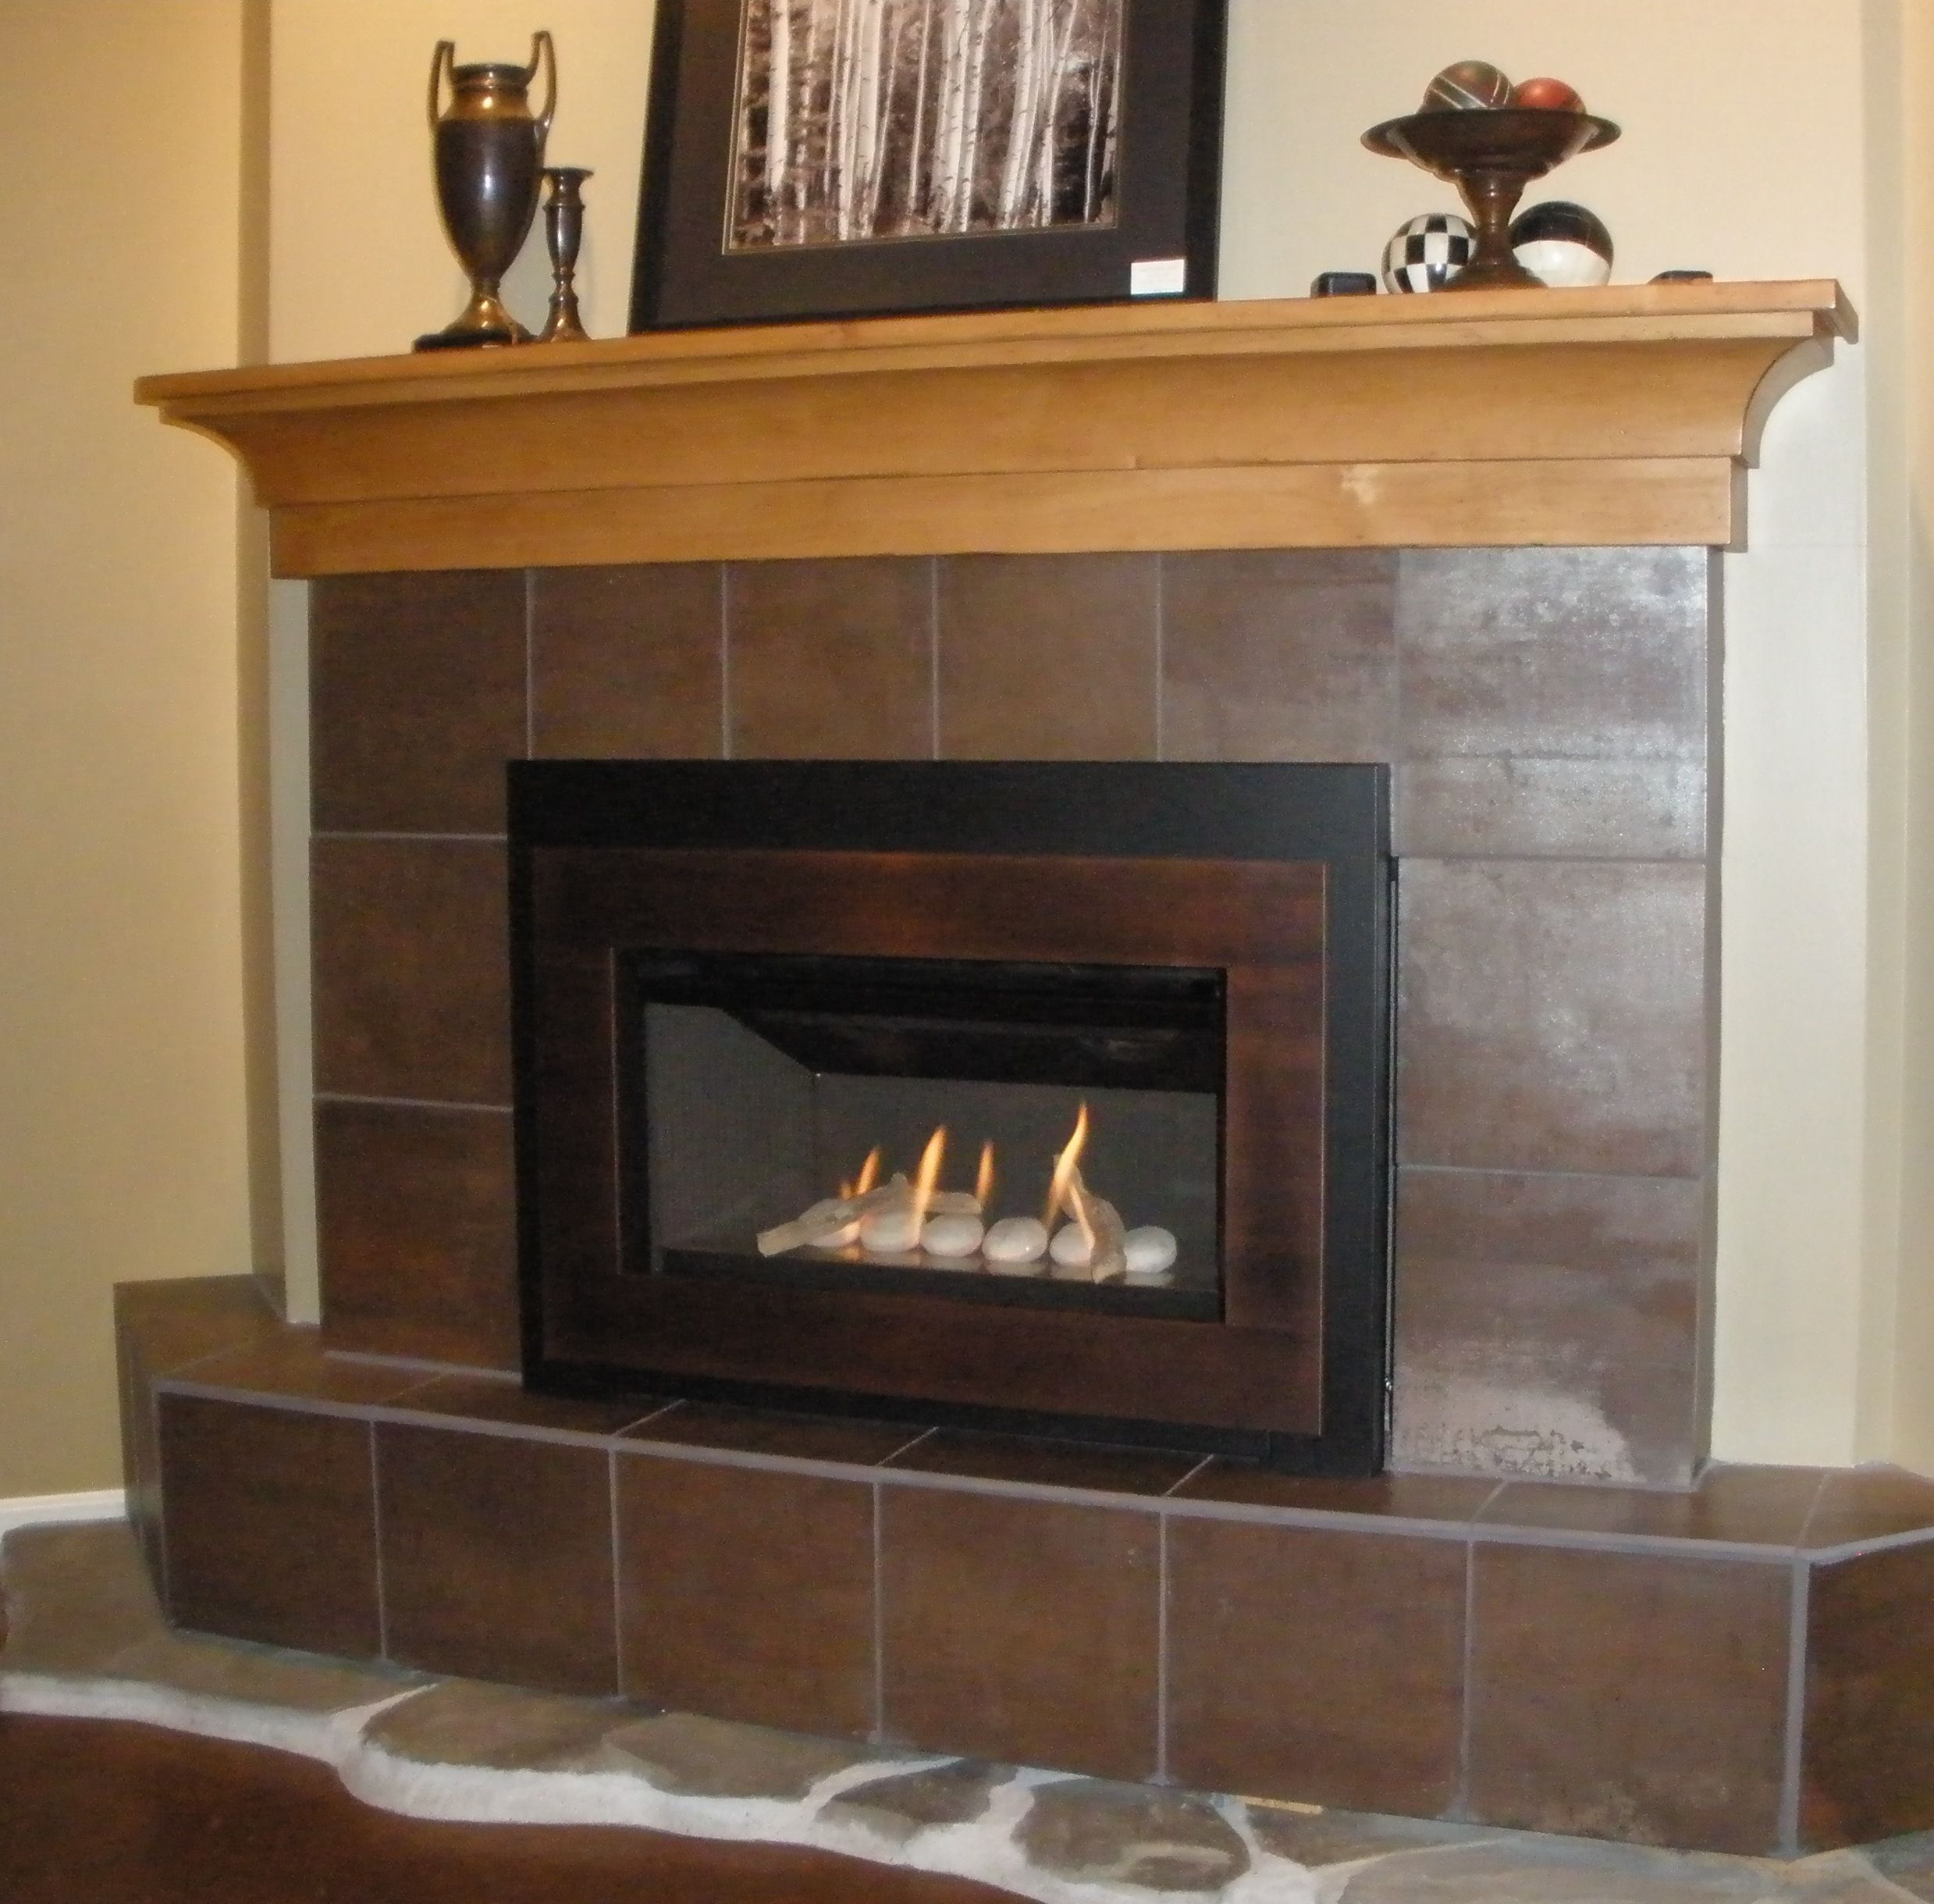 Custom Fireplace Insert Unique Pin On Valor Radiant Gas Fireplaces Midwest Dealer